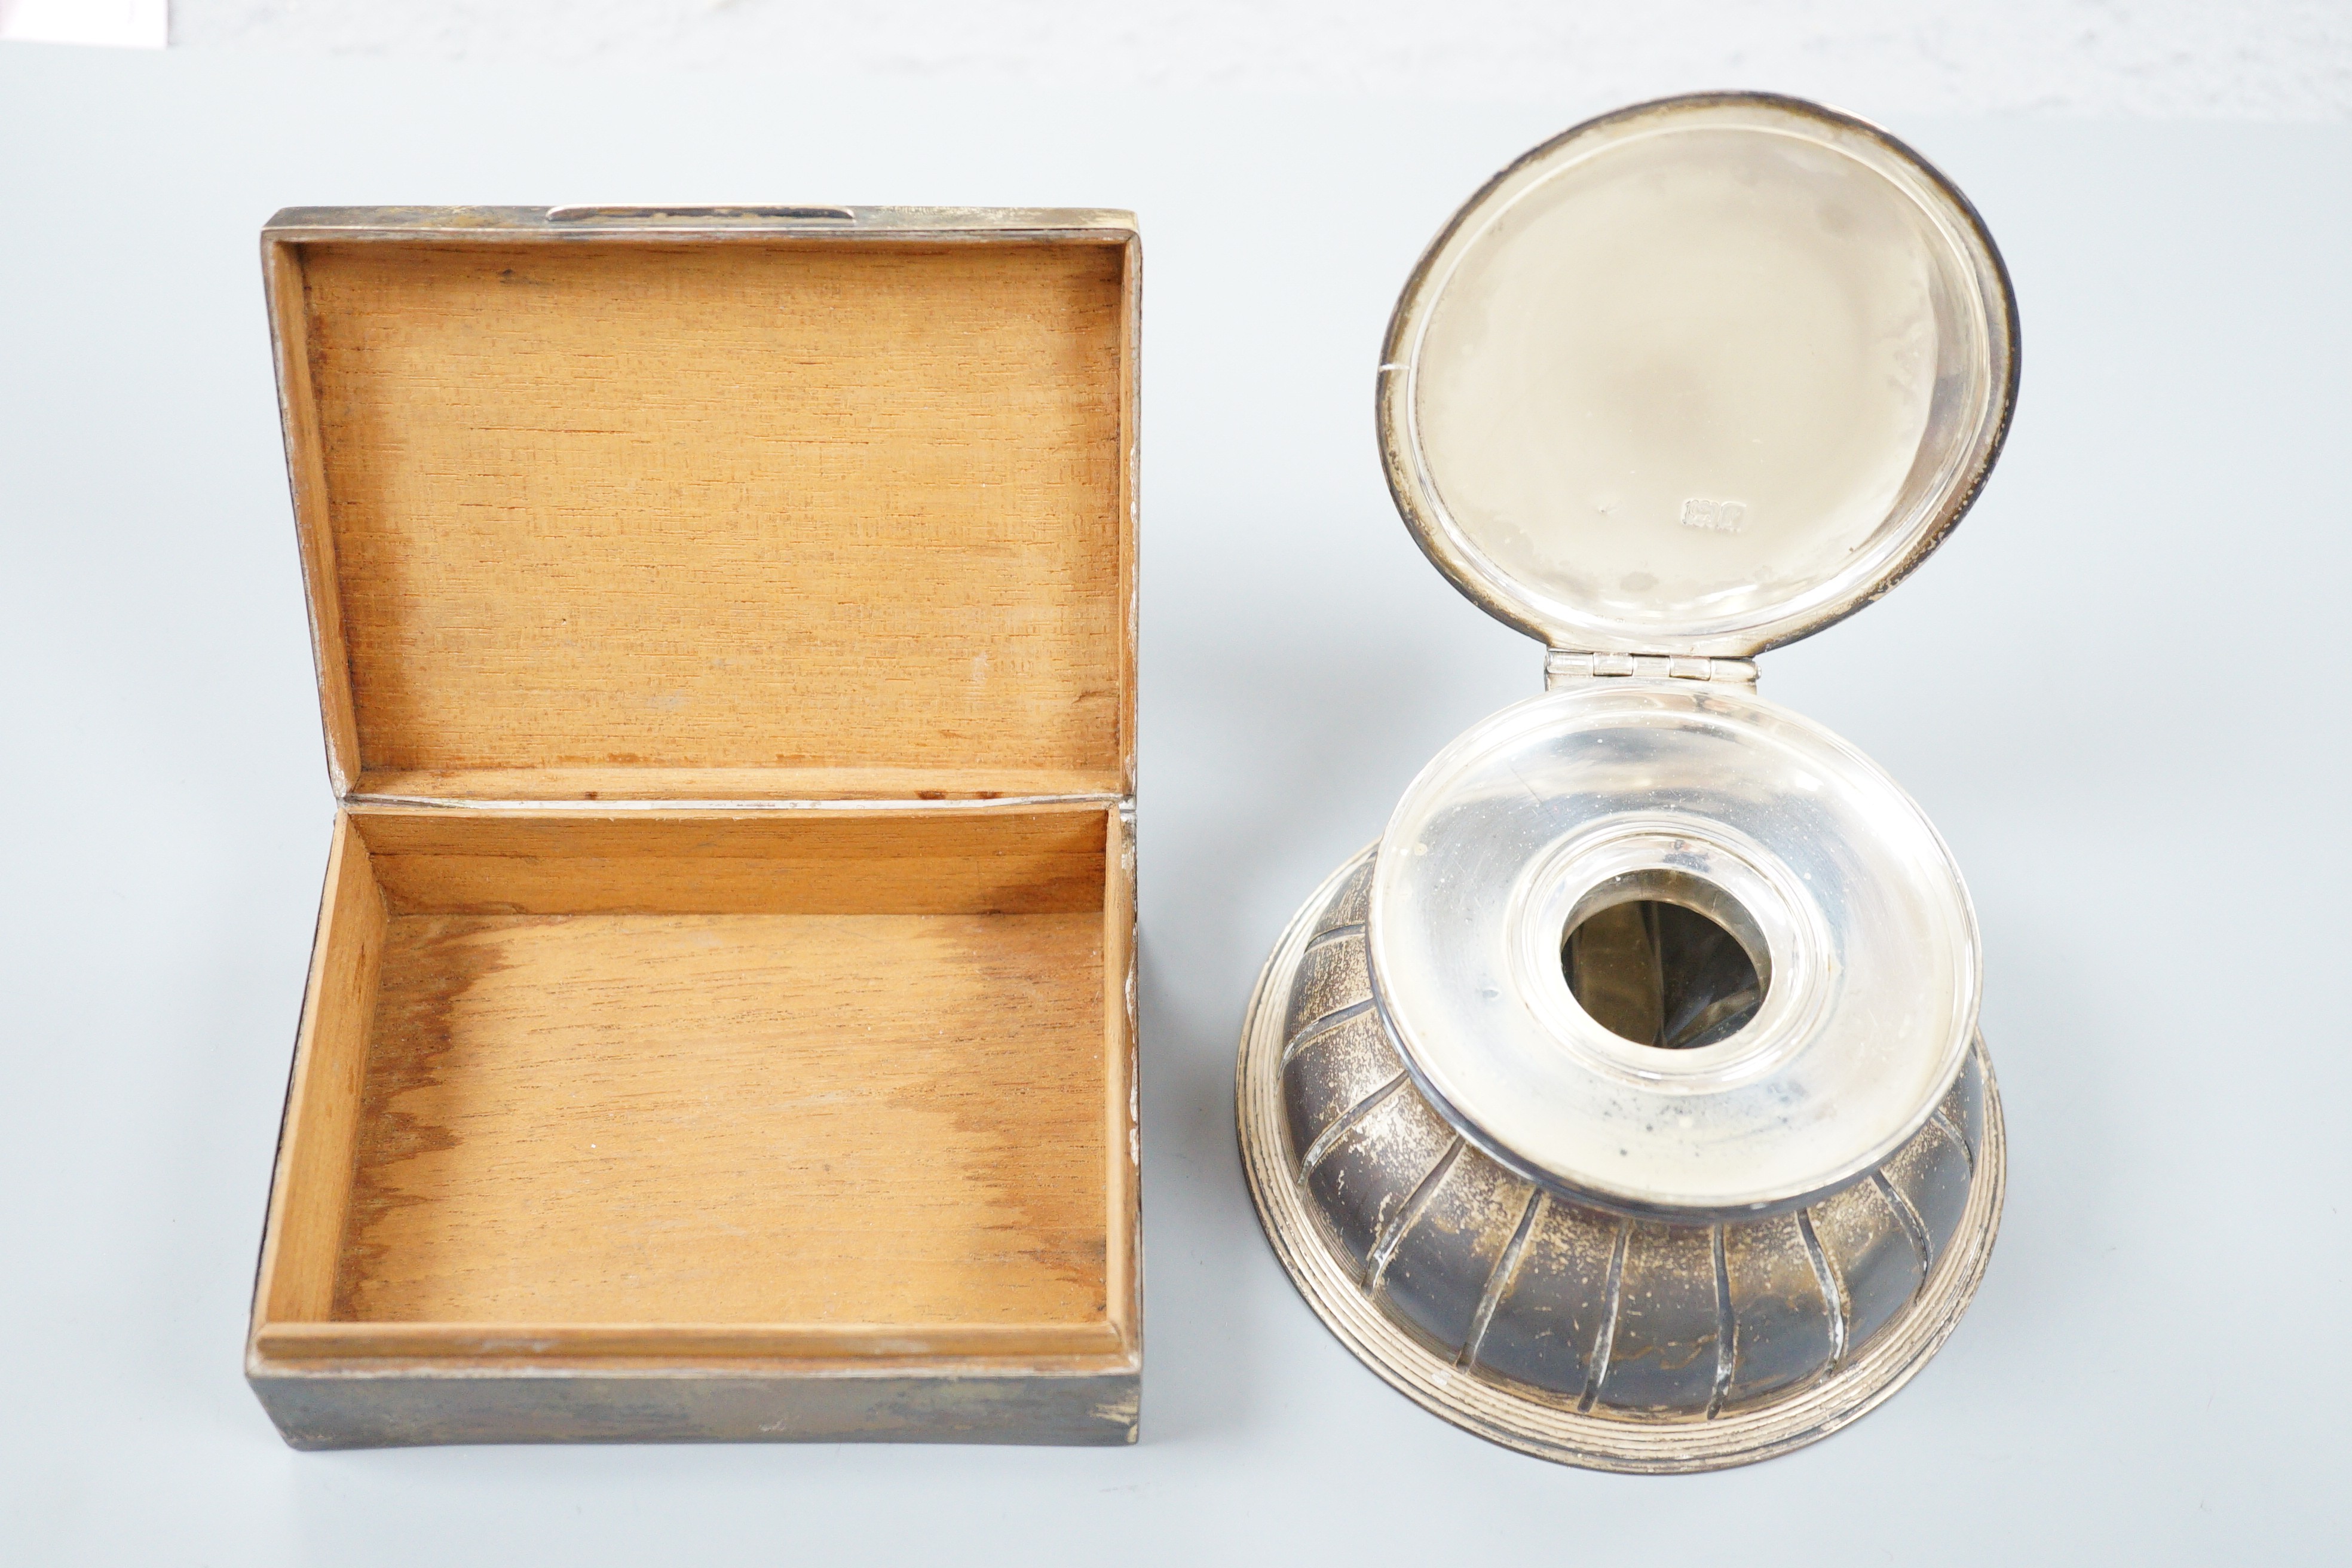 An Edwardian silver mounted circular glass inkwell by George Fox, London, 1901, diameter 11.3cm and a later silver mounted cigarette box.